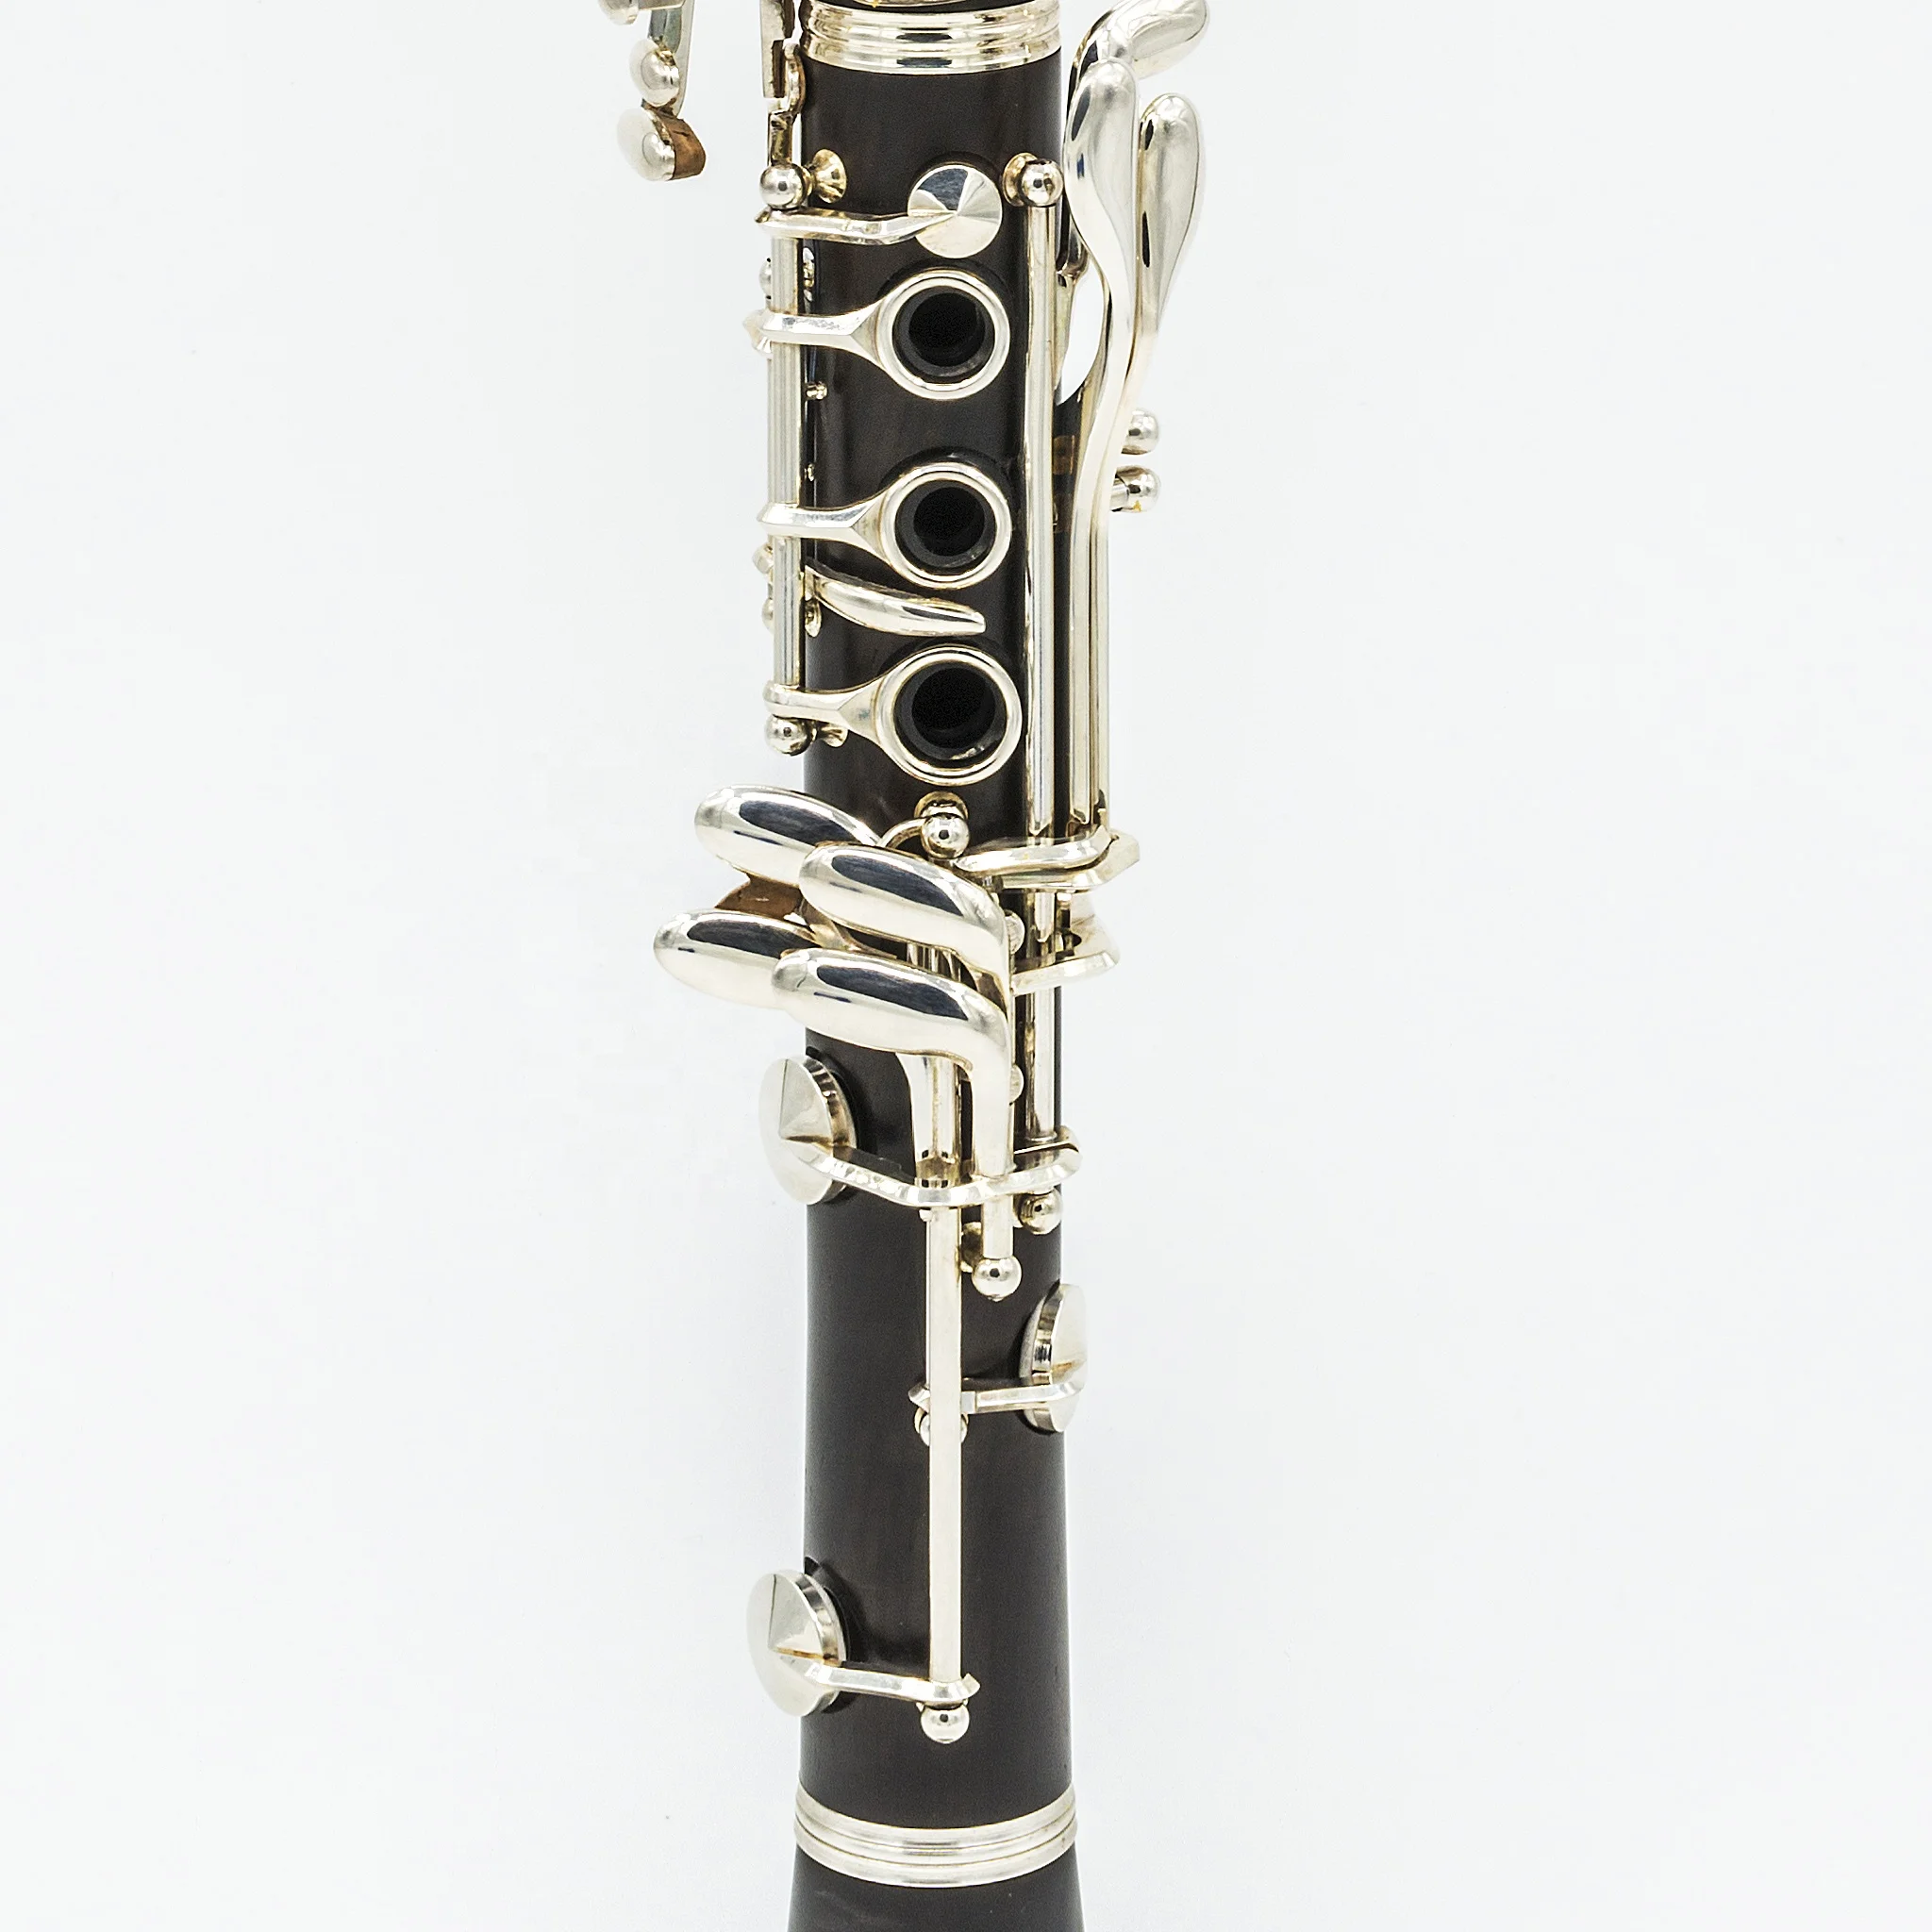 Accept OEM manufacture high quality african wood clarinet for professional player